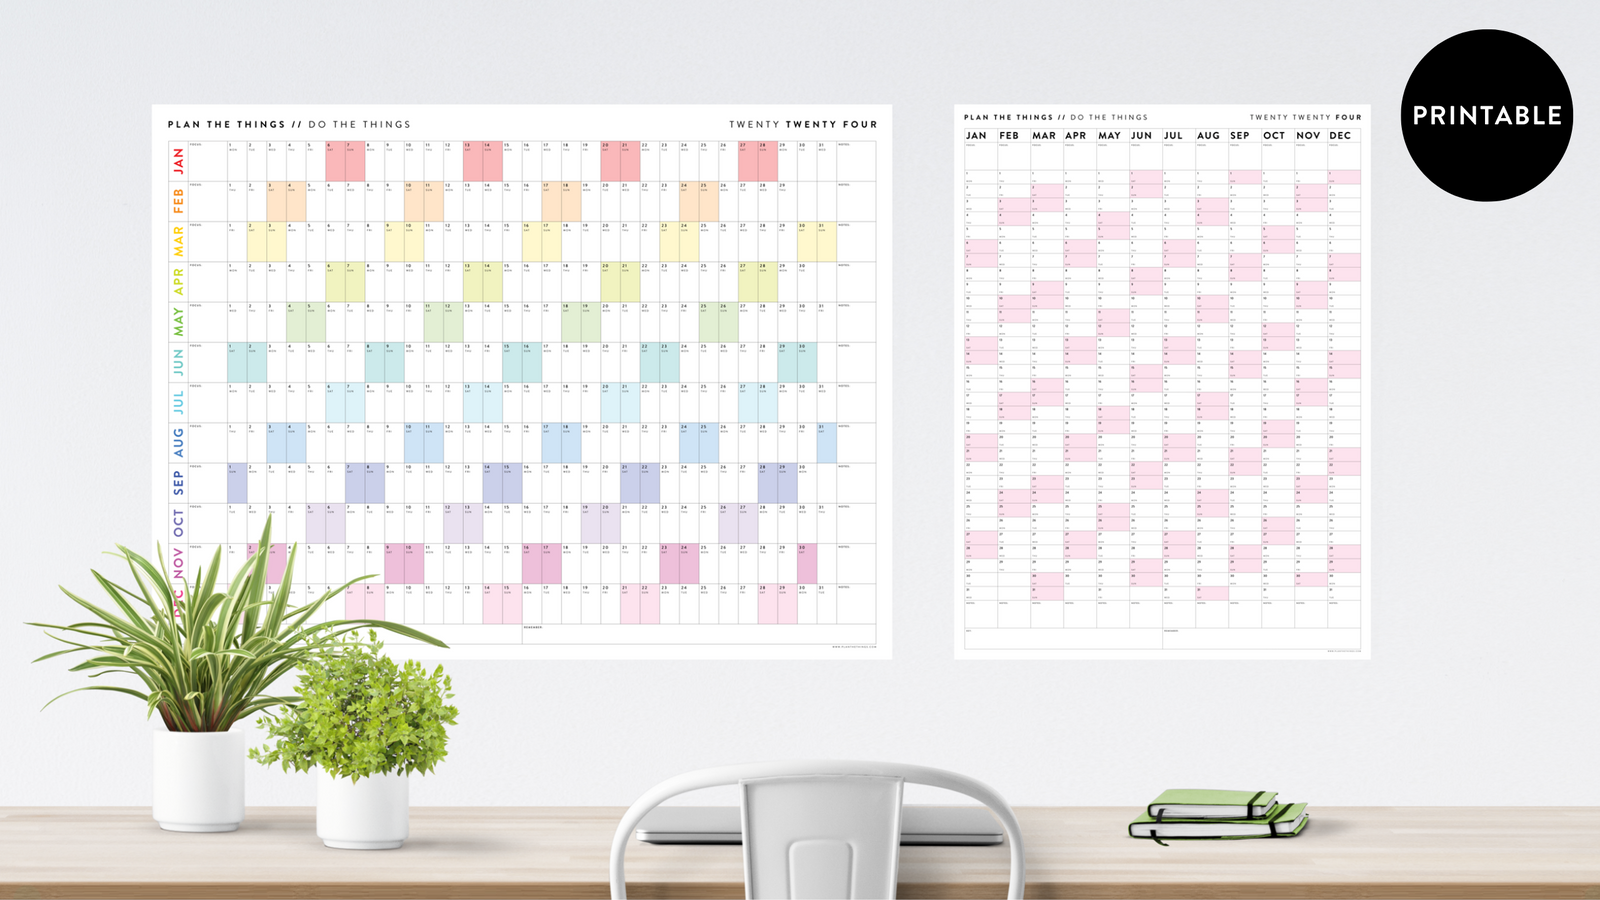 PRINTABLE WALL CALENDARS // INSTANT DOWNLOAD Plan The Things